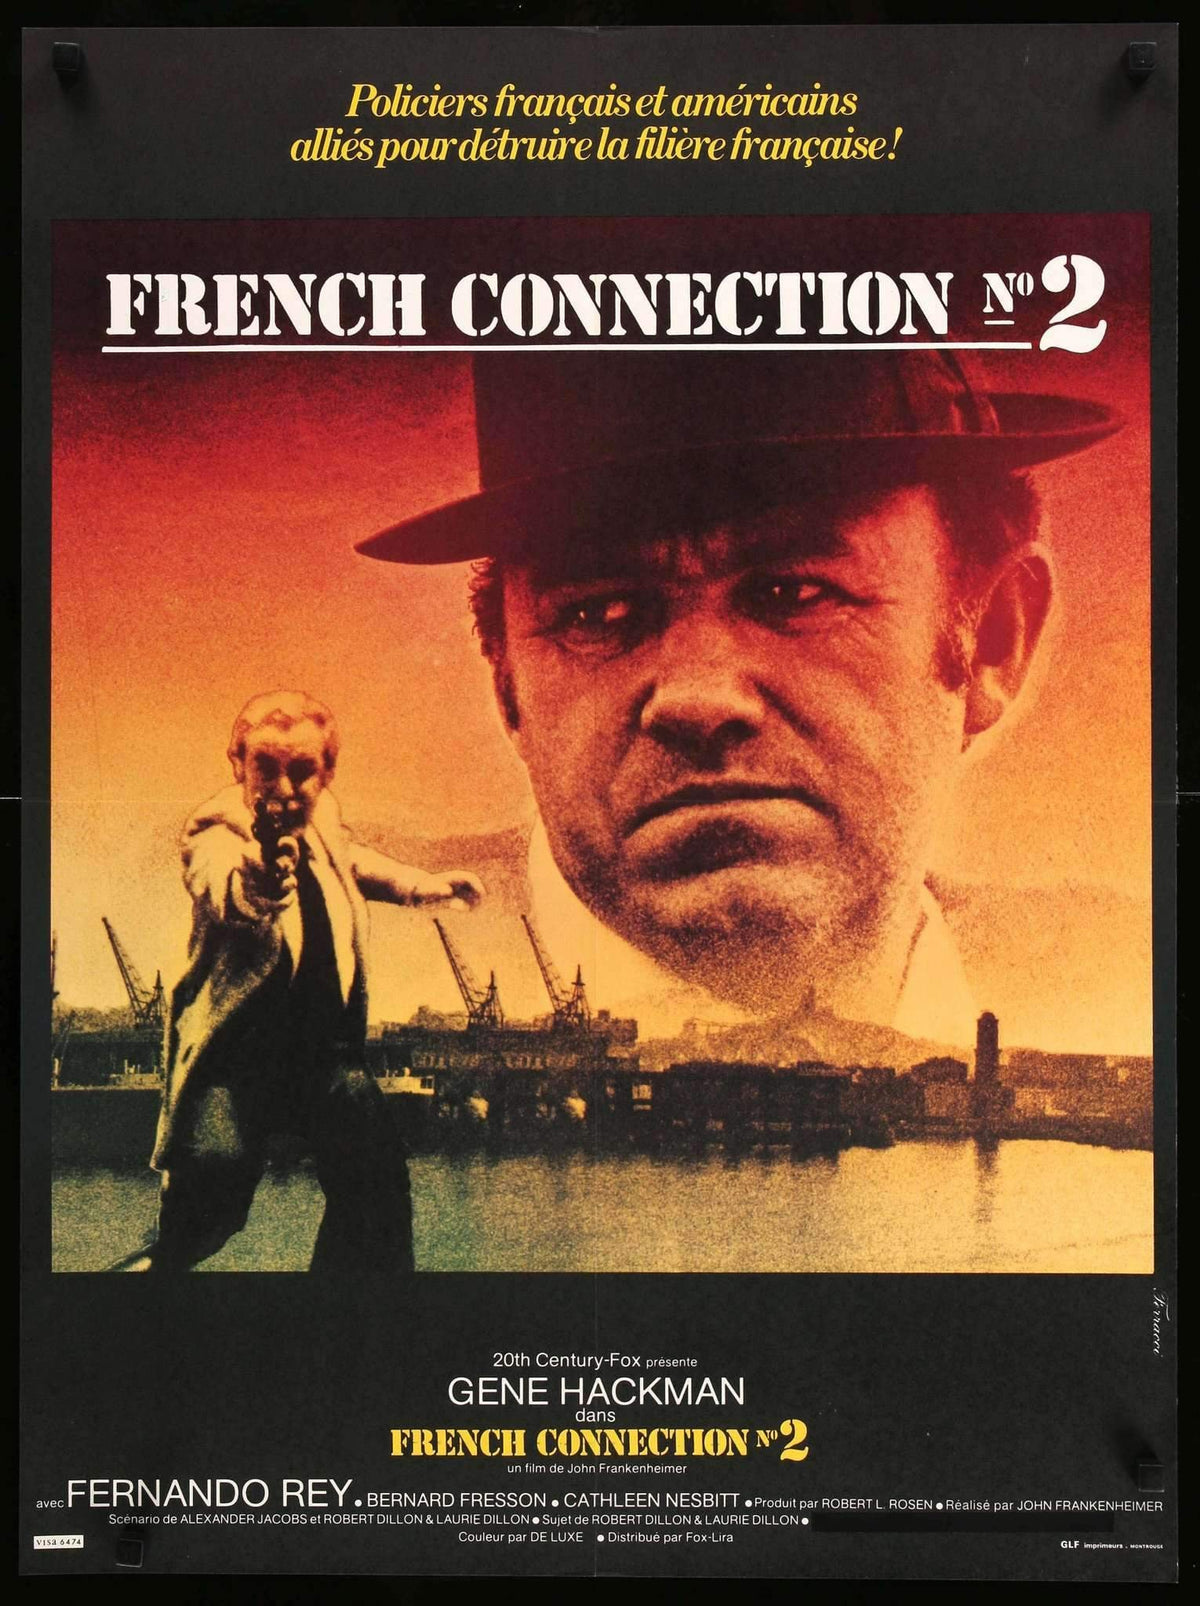 French Connection II (1975) original movie poster for sale at Original Film Art